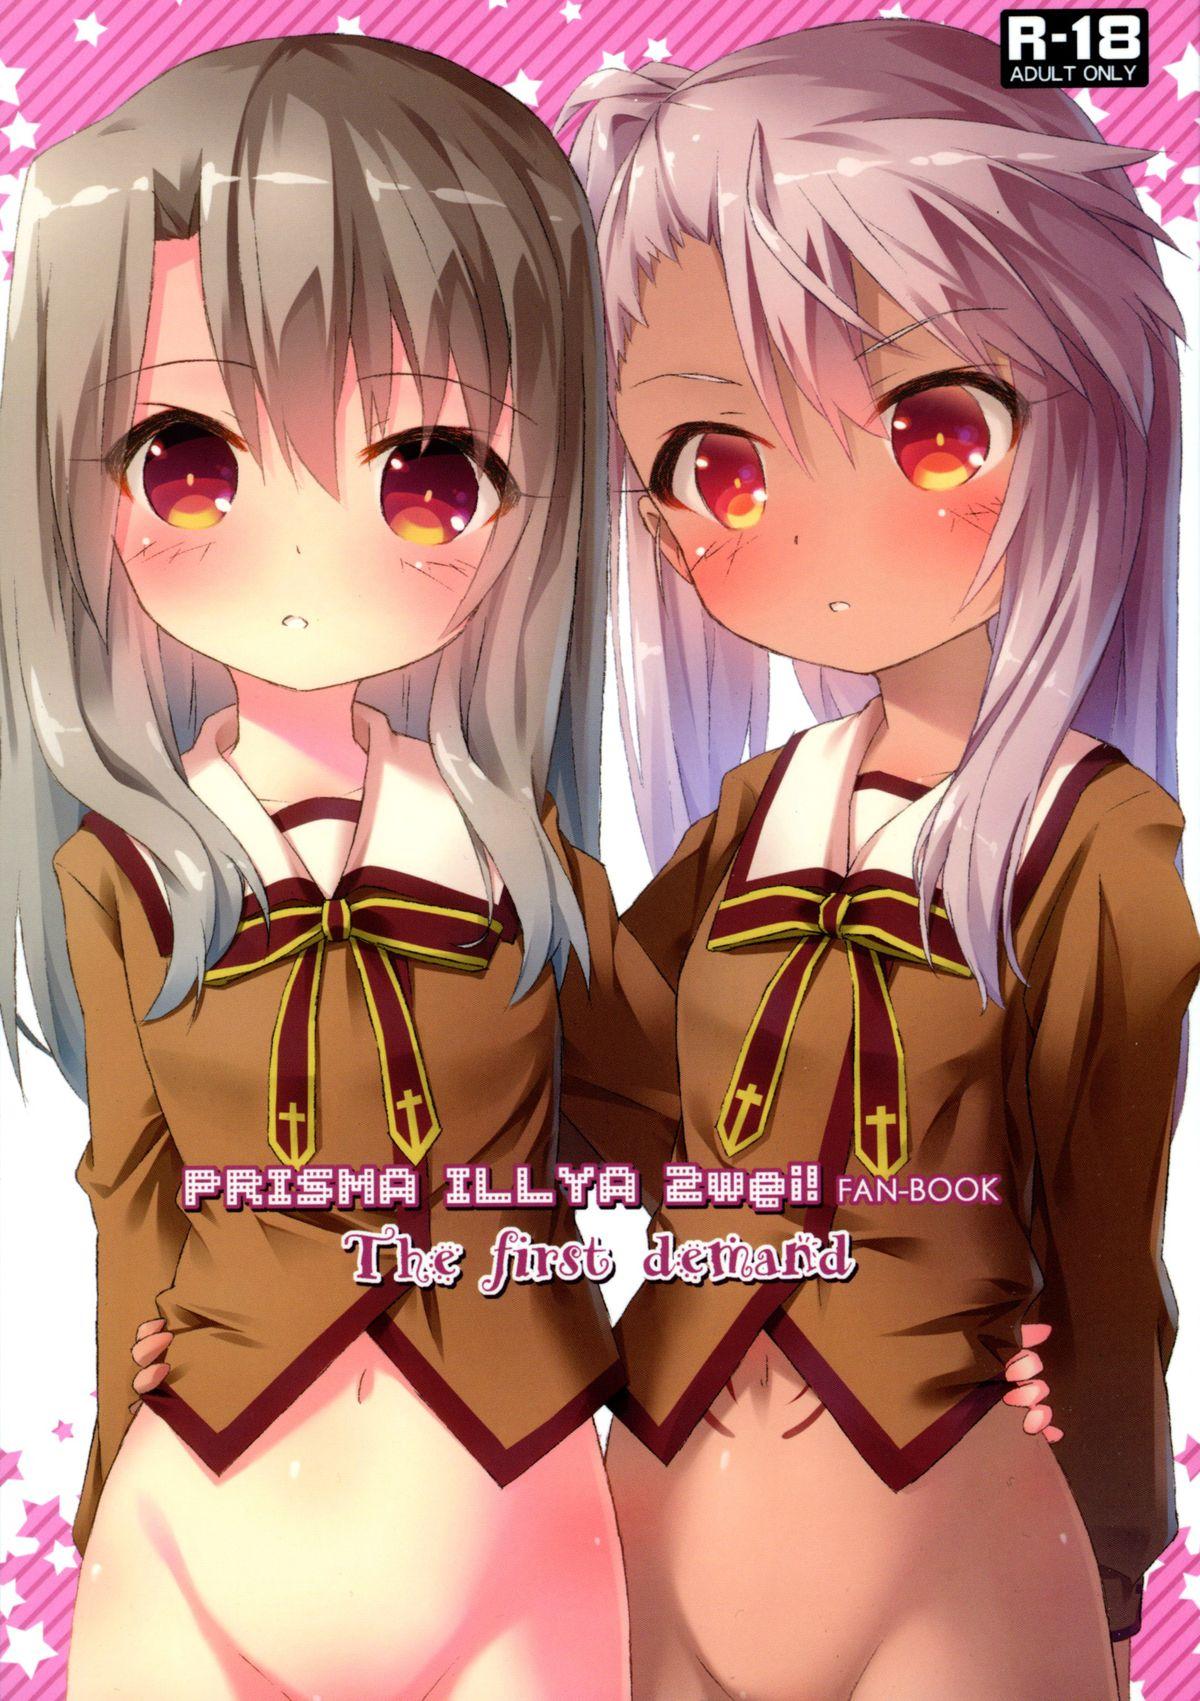 Public Fuck The first demand - Fate kaleid liner prisma illya Audition - Page 2